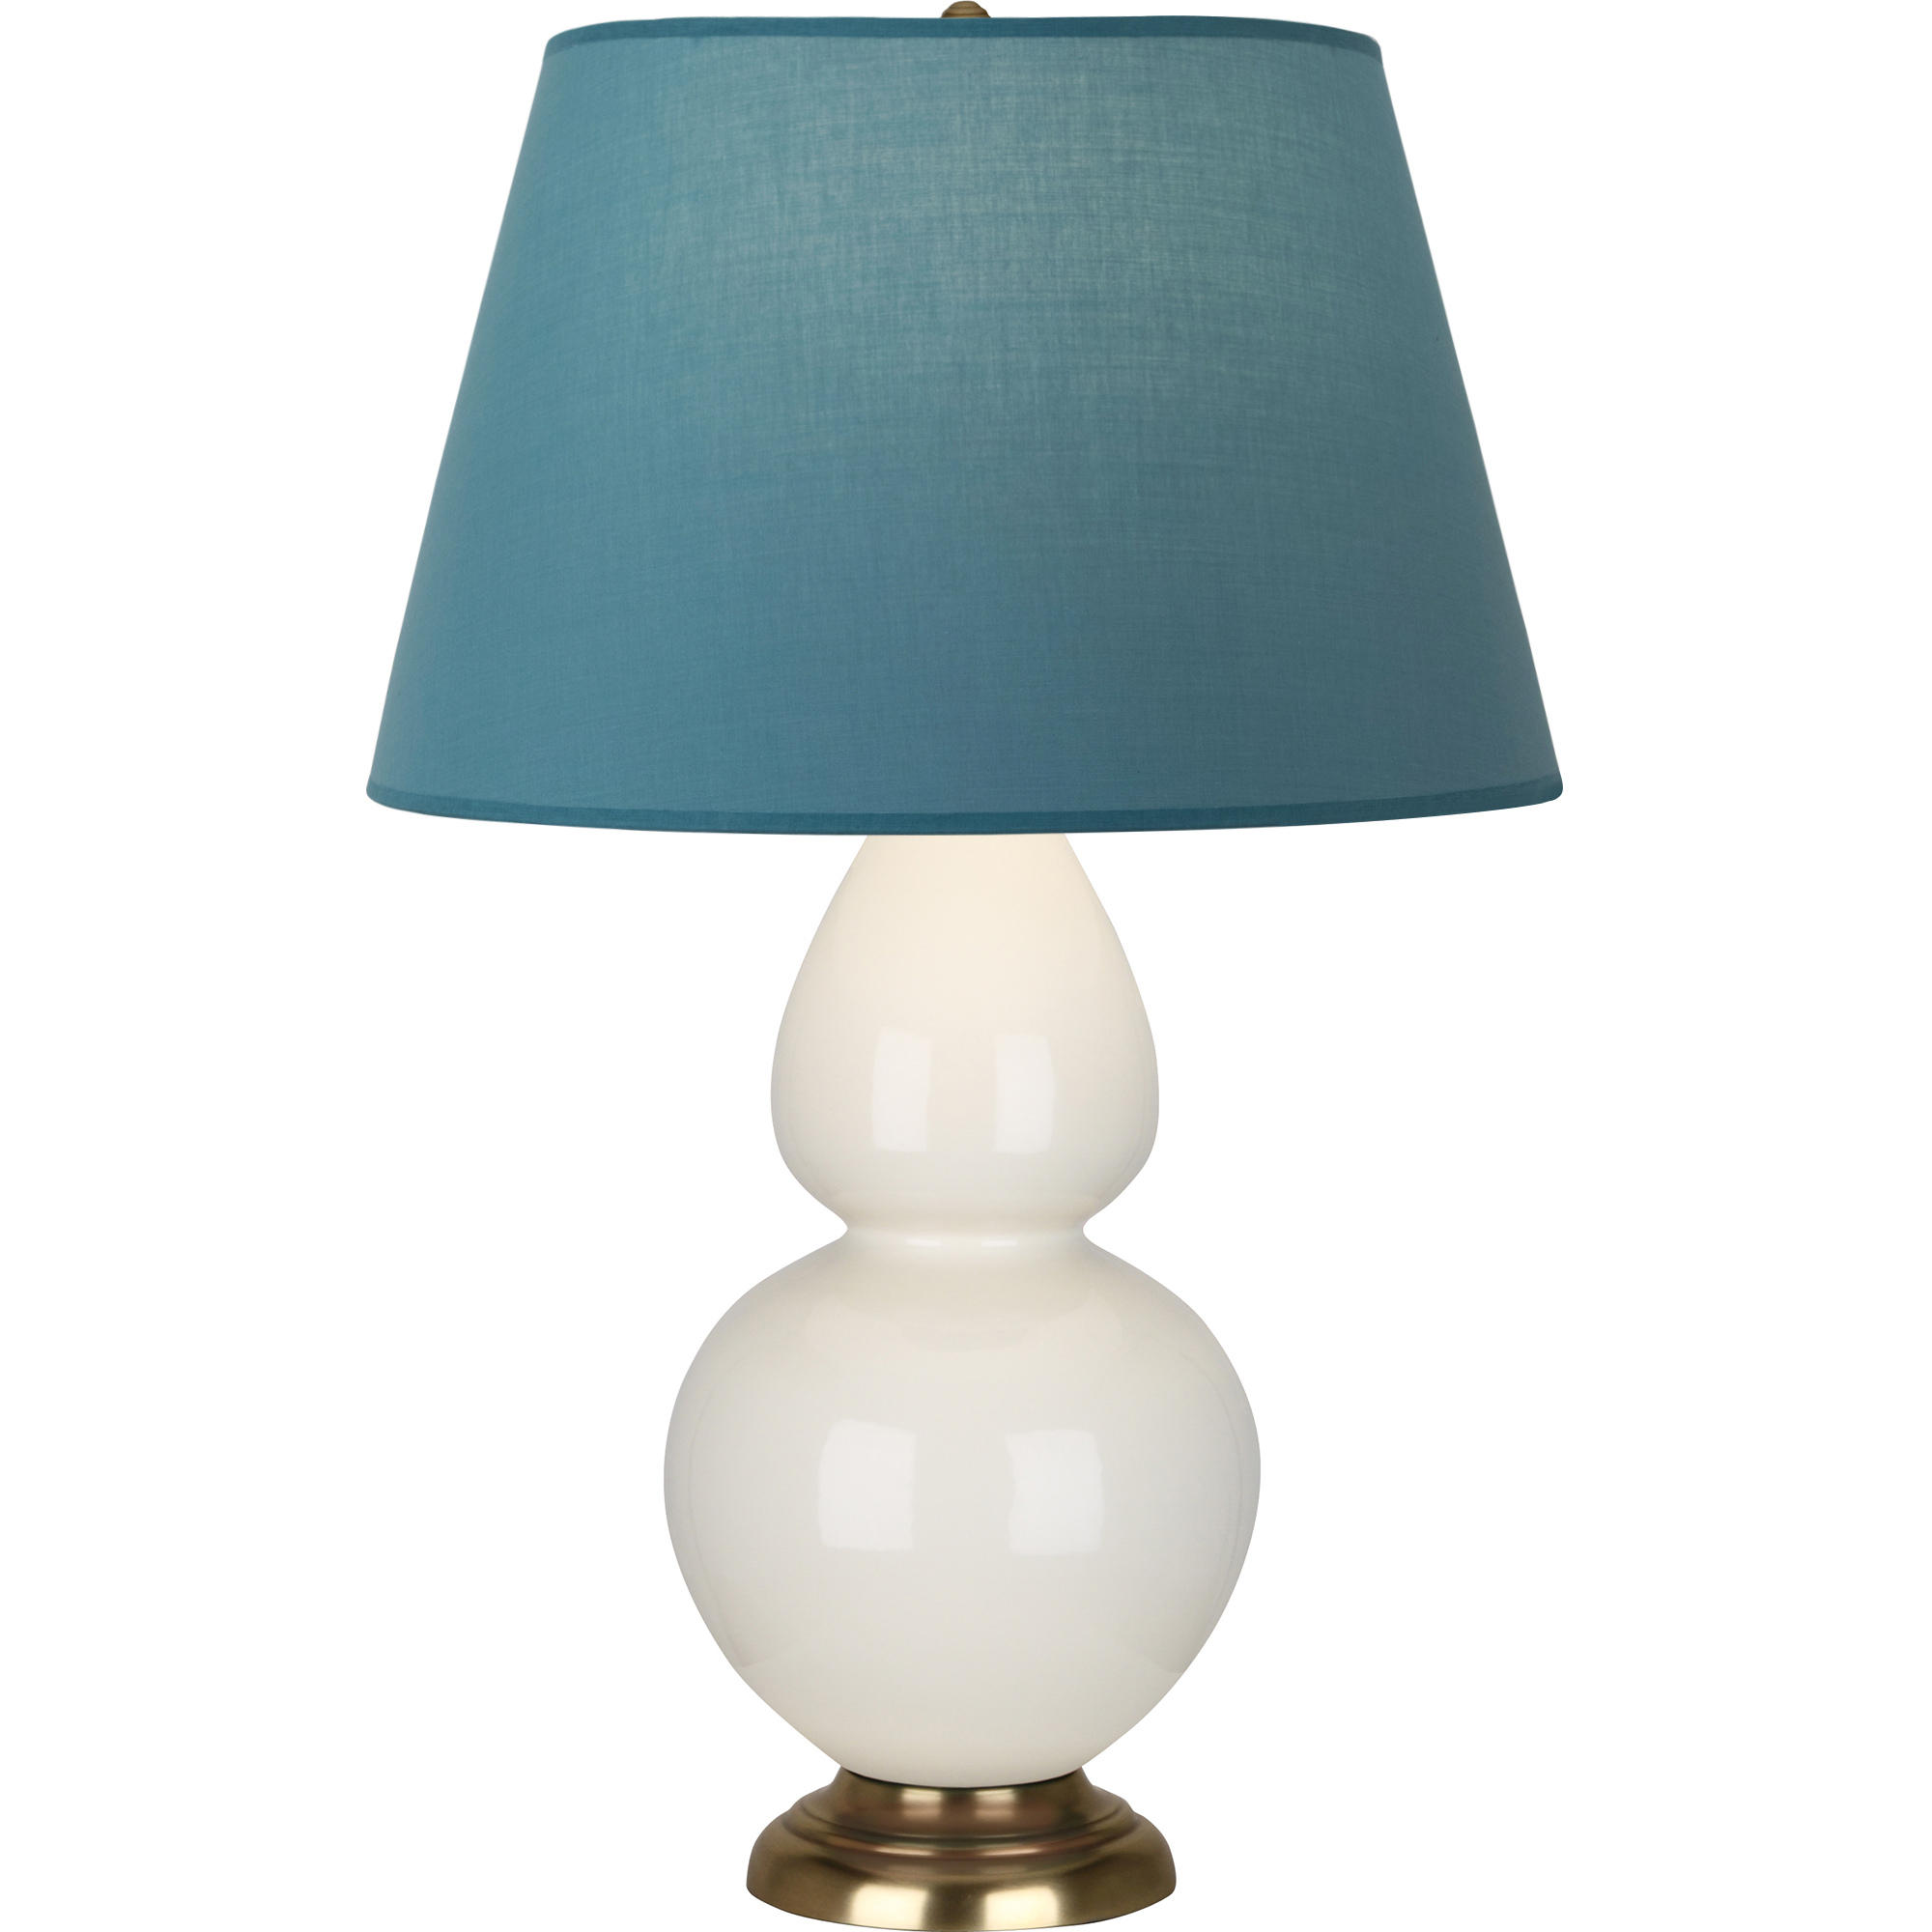 Double Gourd Table Lamp Style #1754B